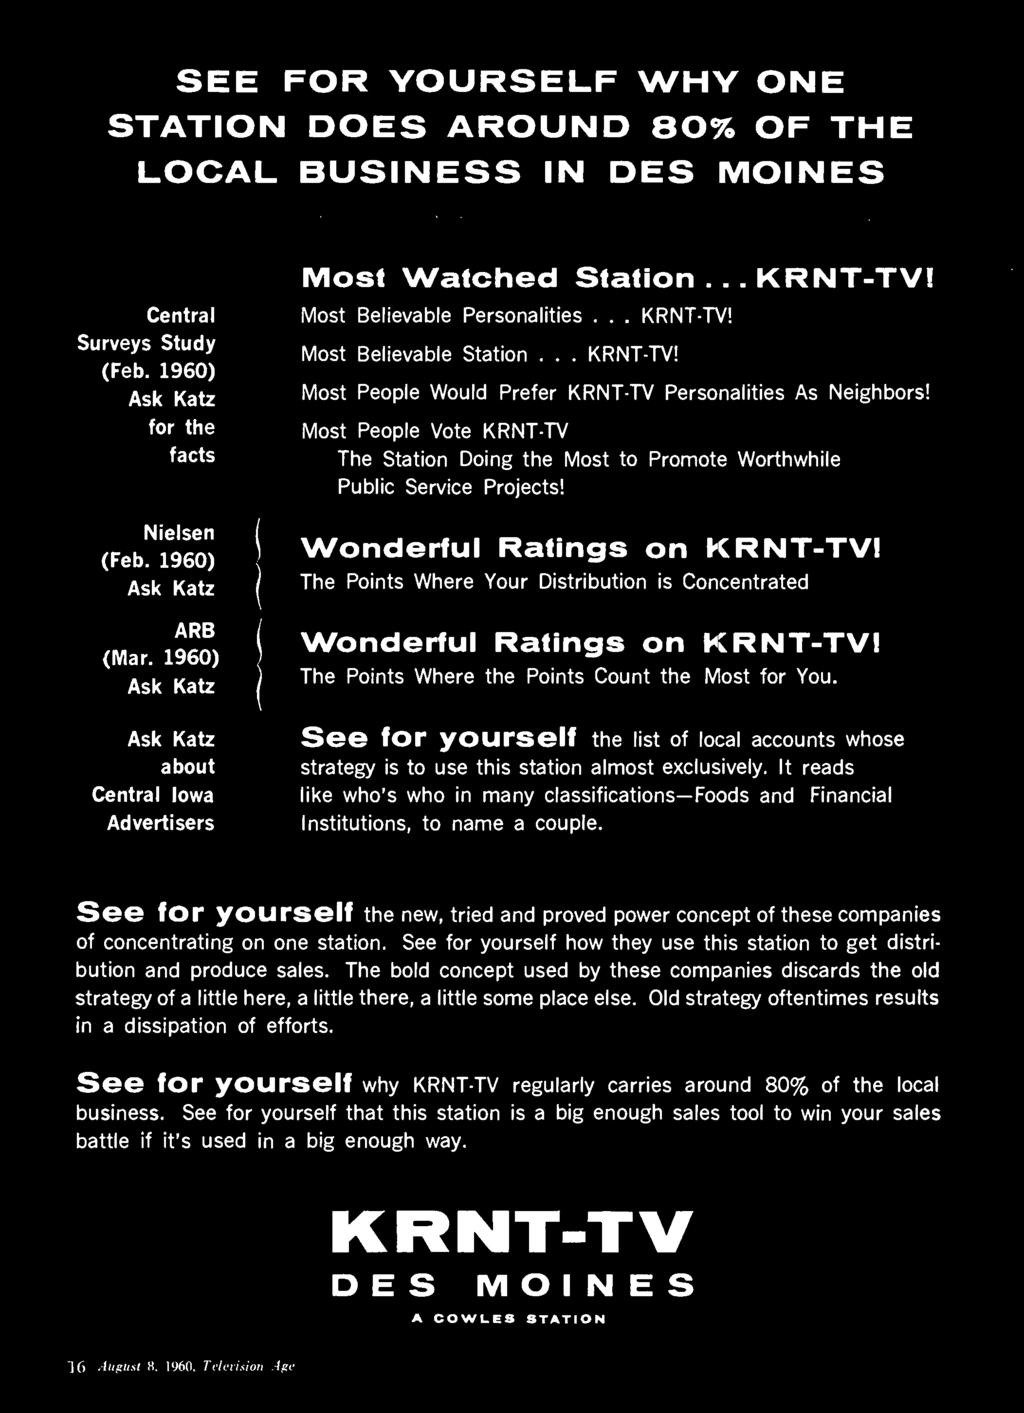 Most People Vote KRNT -TV The Station Doing the Most to Promote Worthwhile Public Service Projects! Wonderful Ratings on KRNT -TV!